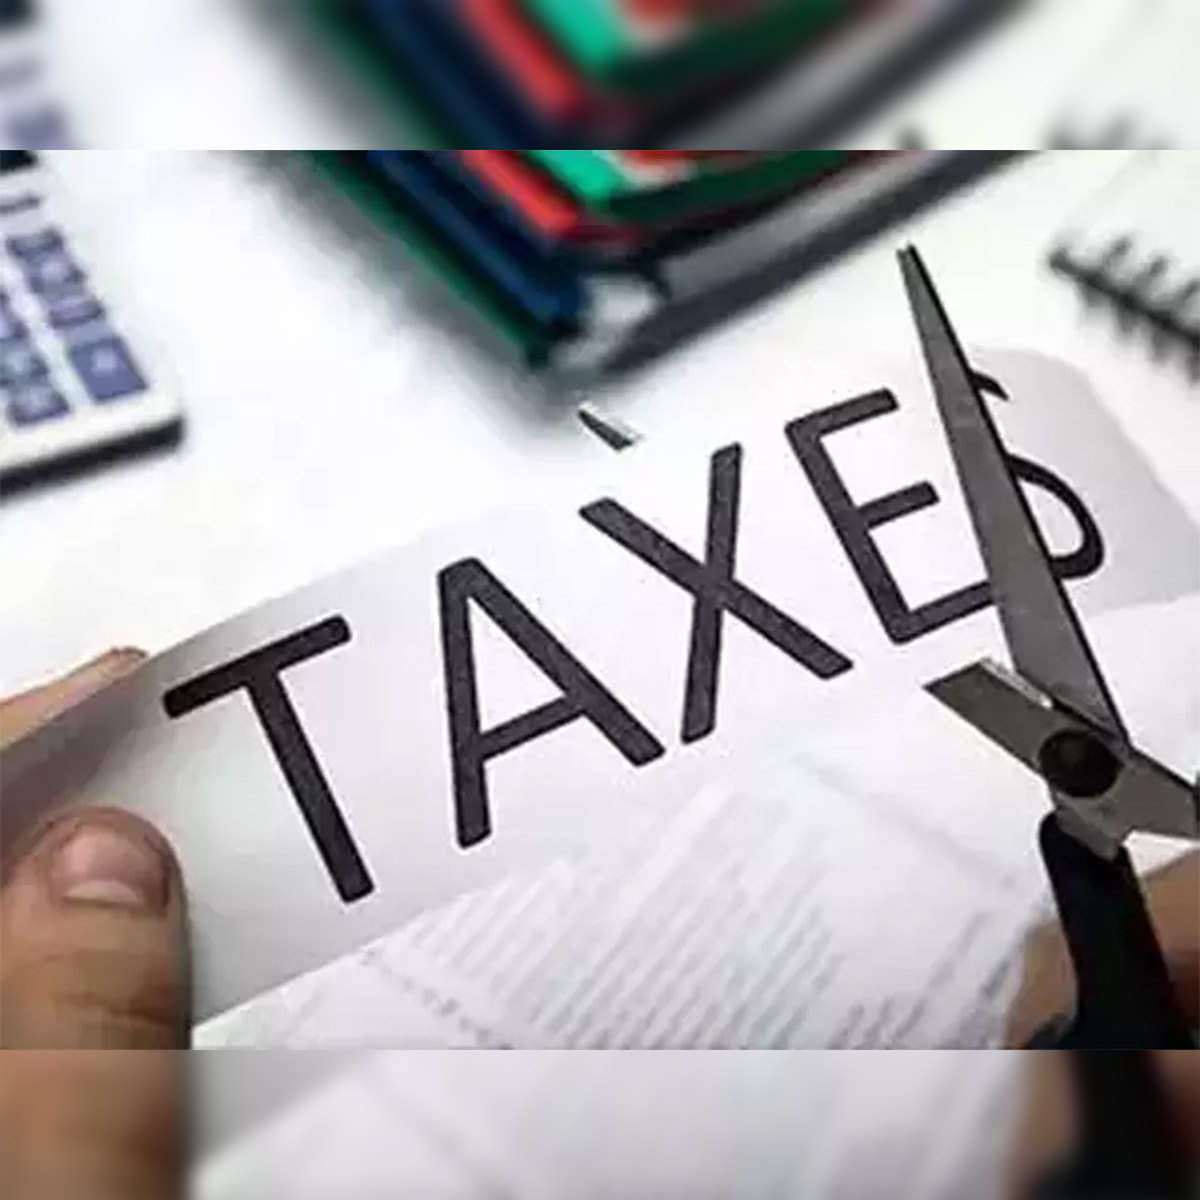 Indirect tax mop-up may fall short of target: Revenue secretary